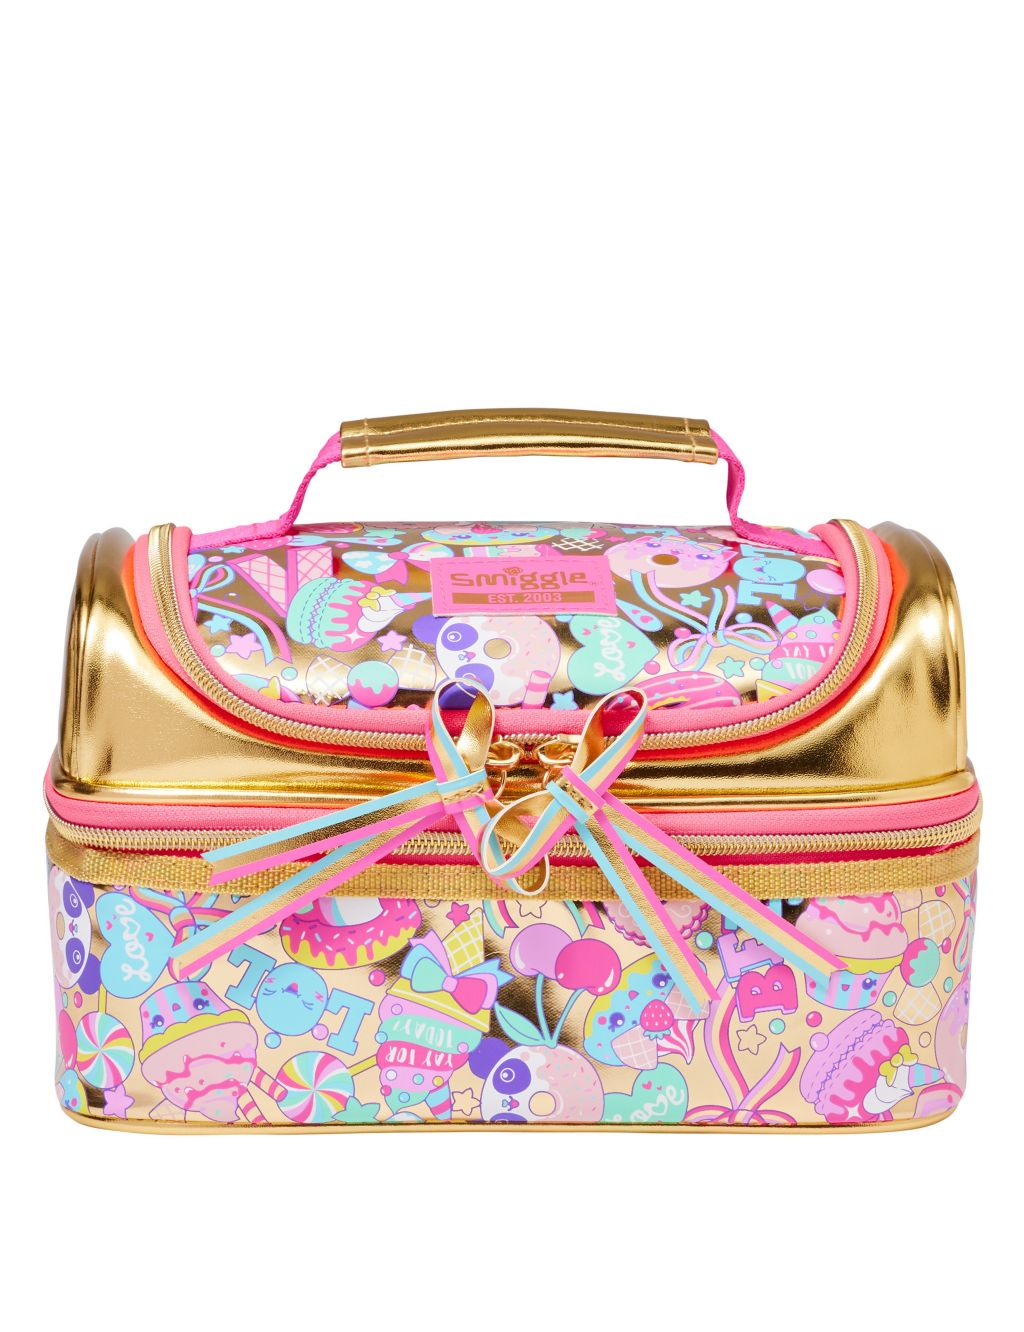 Kids' Patterned Lunch Box image 1